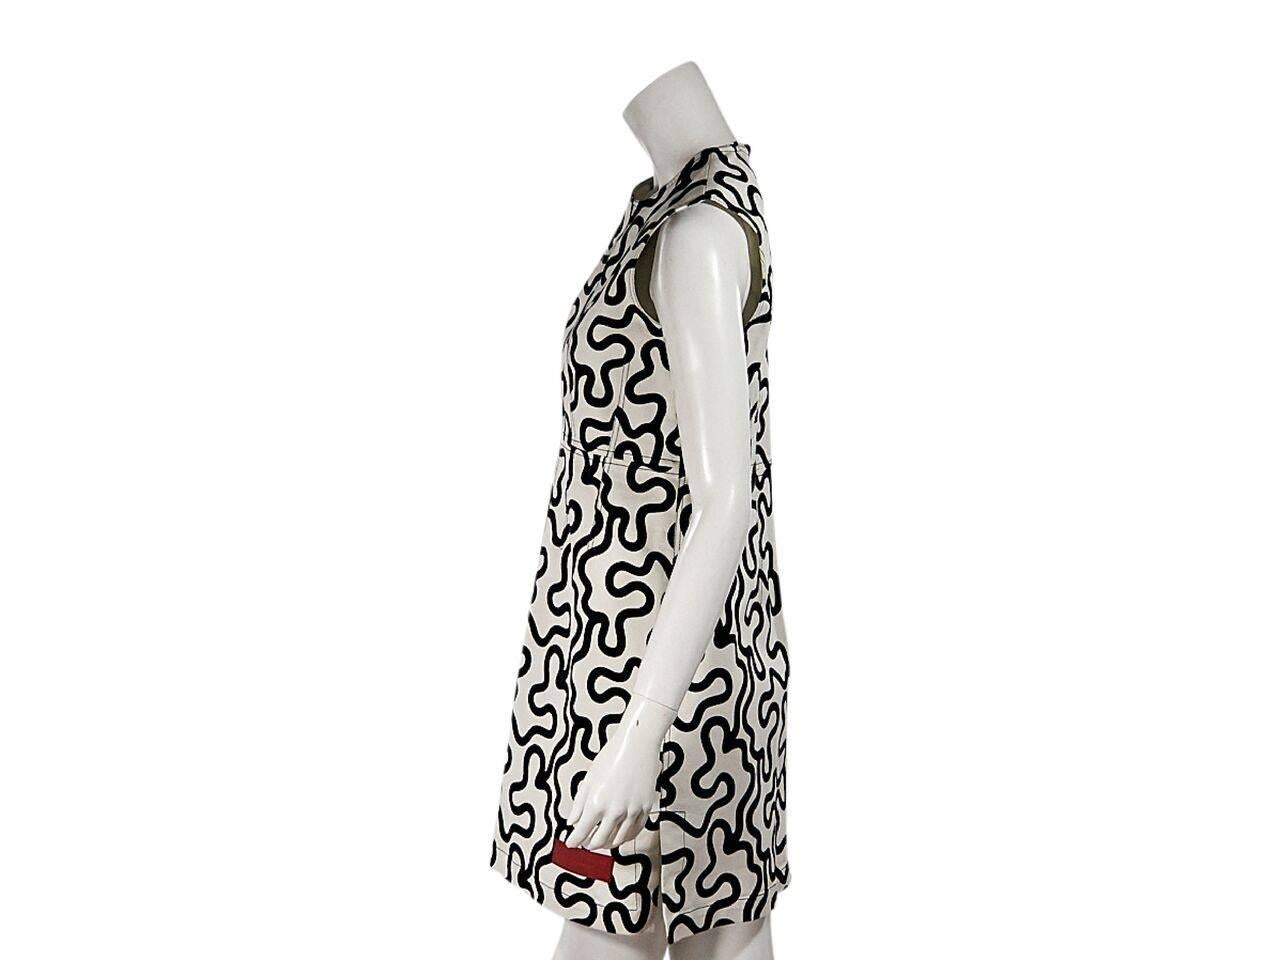 Product details:  Black and white swirl-printed mini dress by J.W. Anderson.  Crewneck.  Sleeveless.  Concealed back zip closure.  Side hem vents.  Fitted seams create a flattering silhouette. 
Condition: Pre-owned. Very good.
Est. Retail $ 698.00